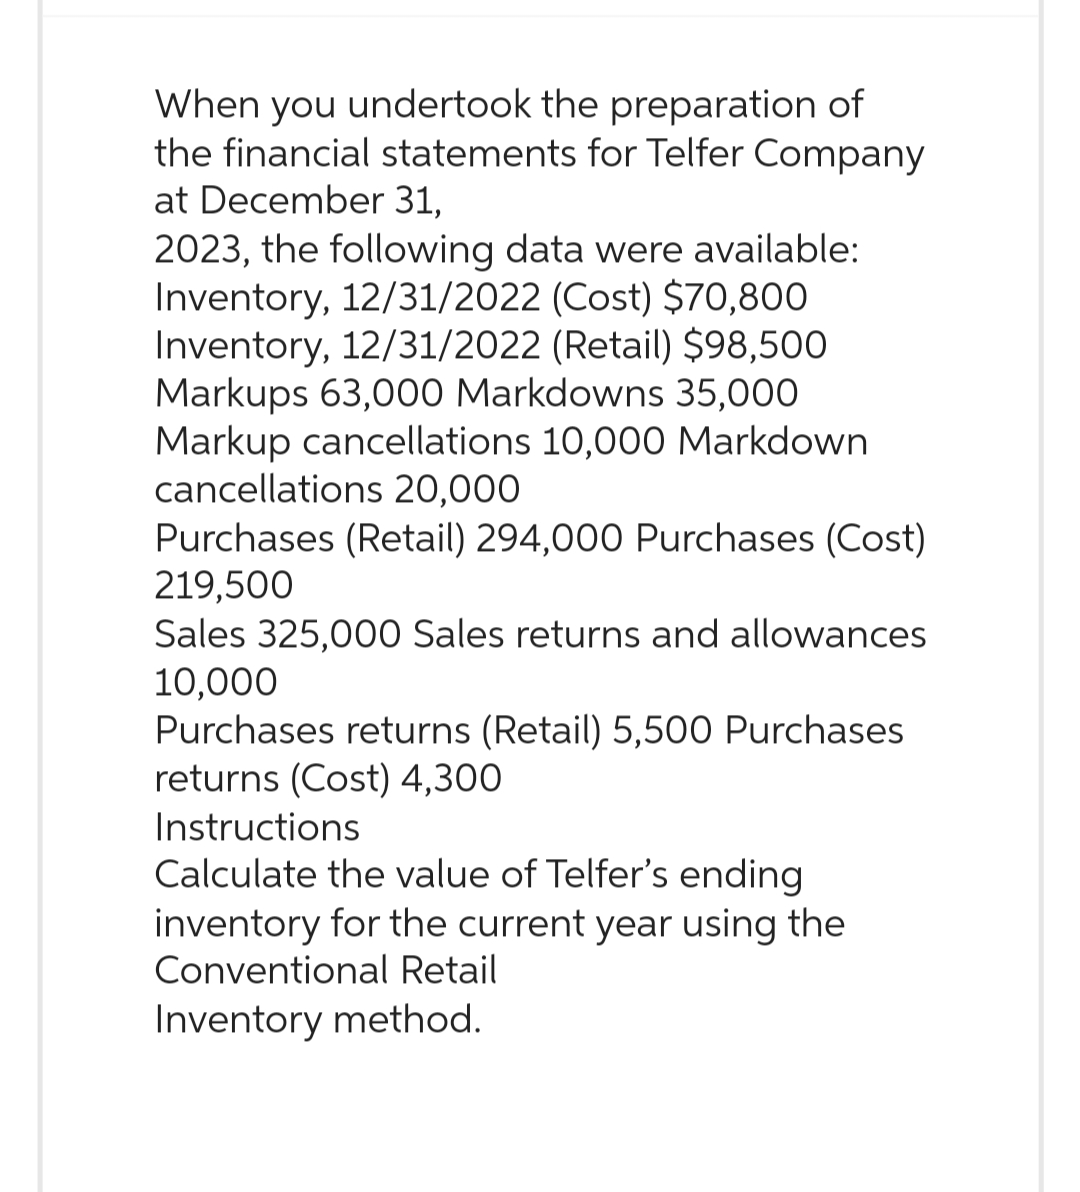 When you undertook the preparation of
the financial statements for Telfer Company
at December 31,
2023, the following data were available:
Inventory, 12/31/2022 (Cost) $70,800
Inventory, 12/31/2022 (Retail) $98,500
Markups 63,000 Markdowns 35,000
Markup cancellations 10,000 Markdown
cancellations 20,000
Purchases (Retail) 294,000 Purchases (Cost)
219,500
Sales 325,000 Sales returns and allowances
10,000
Purchases returns (Retail) 5,500 Purchases
returns (Cost) 4,300
Instructions
Calculate the value of Telfer's ending
inventory for the current year using the
Conventional Retail
Inventory method.